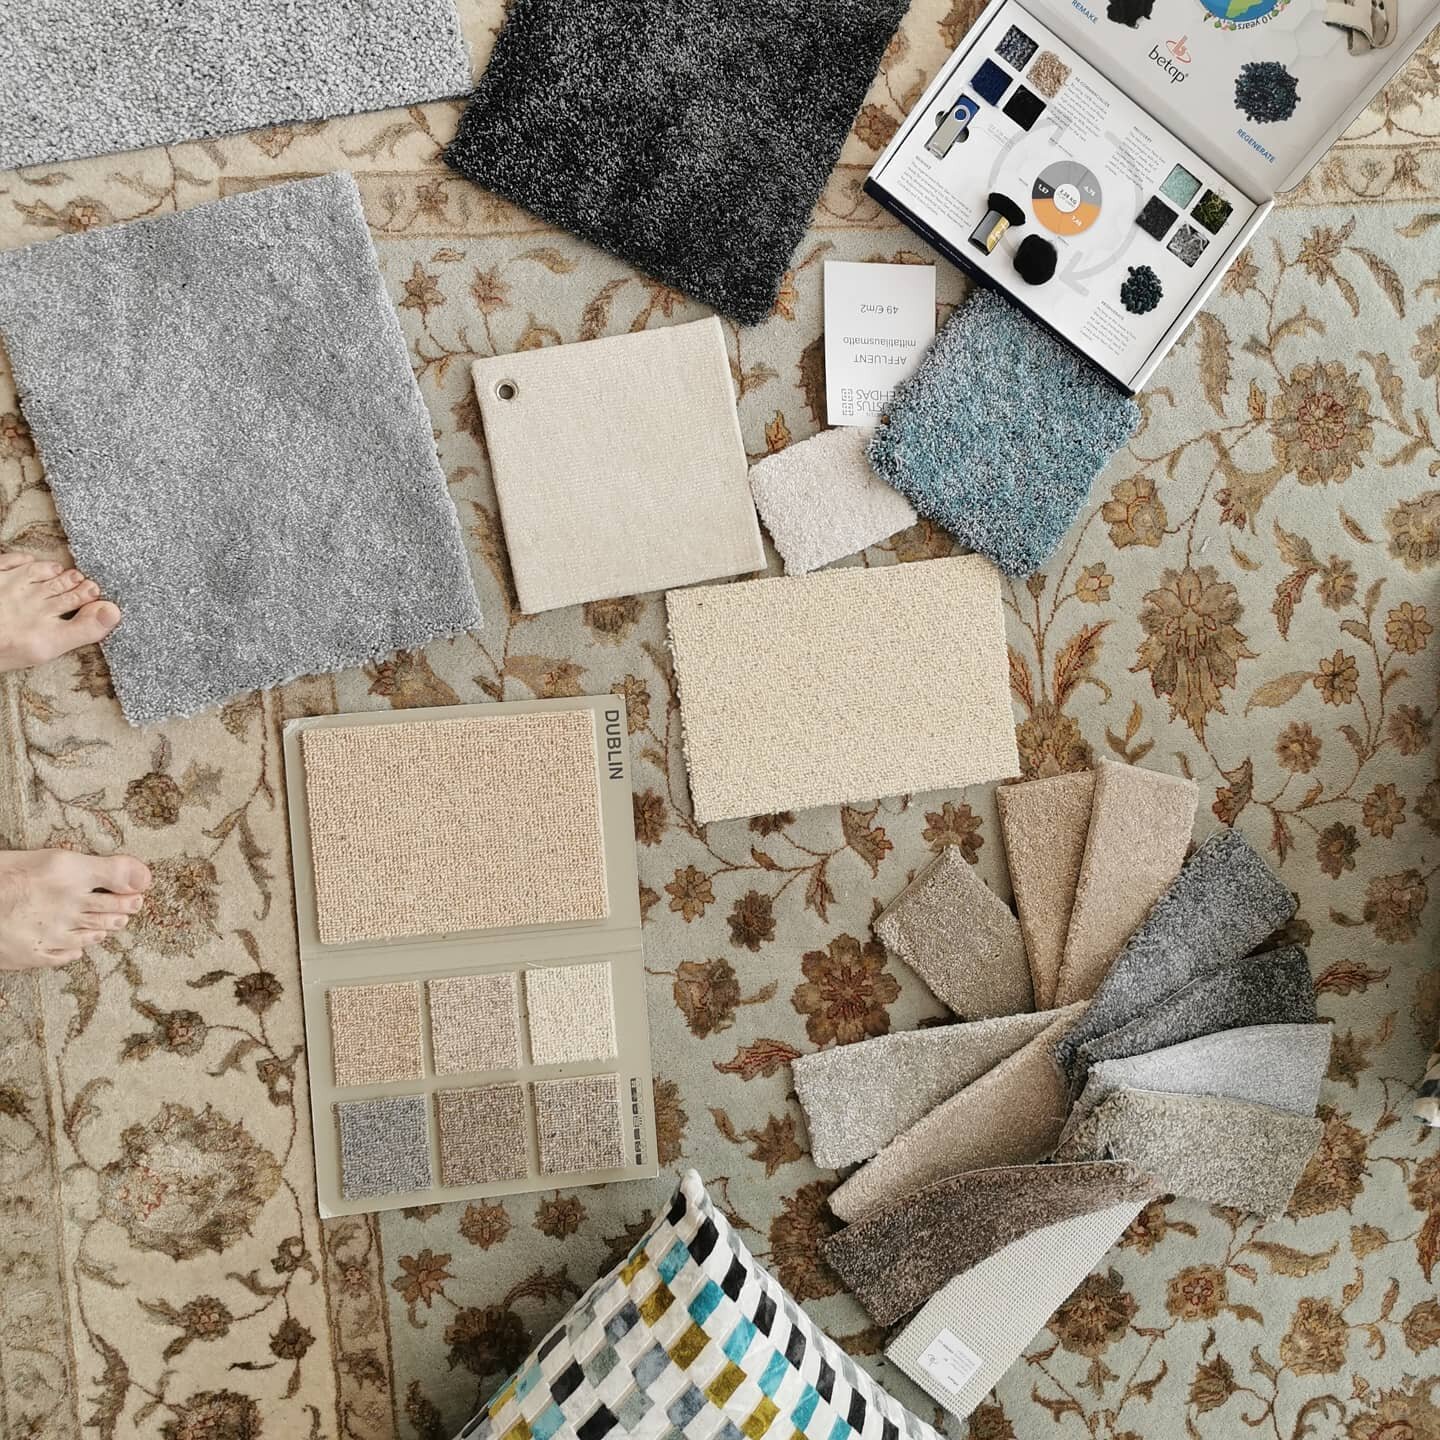 Sunday afternoon goes nicely when making carpet choices. NextGe's rugs are soft and durable and made of 100% recyclable materials. It's all that's left.